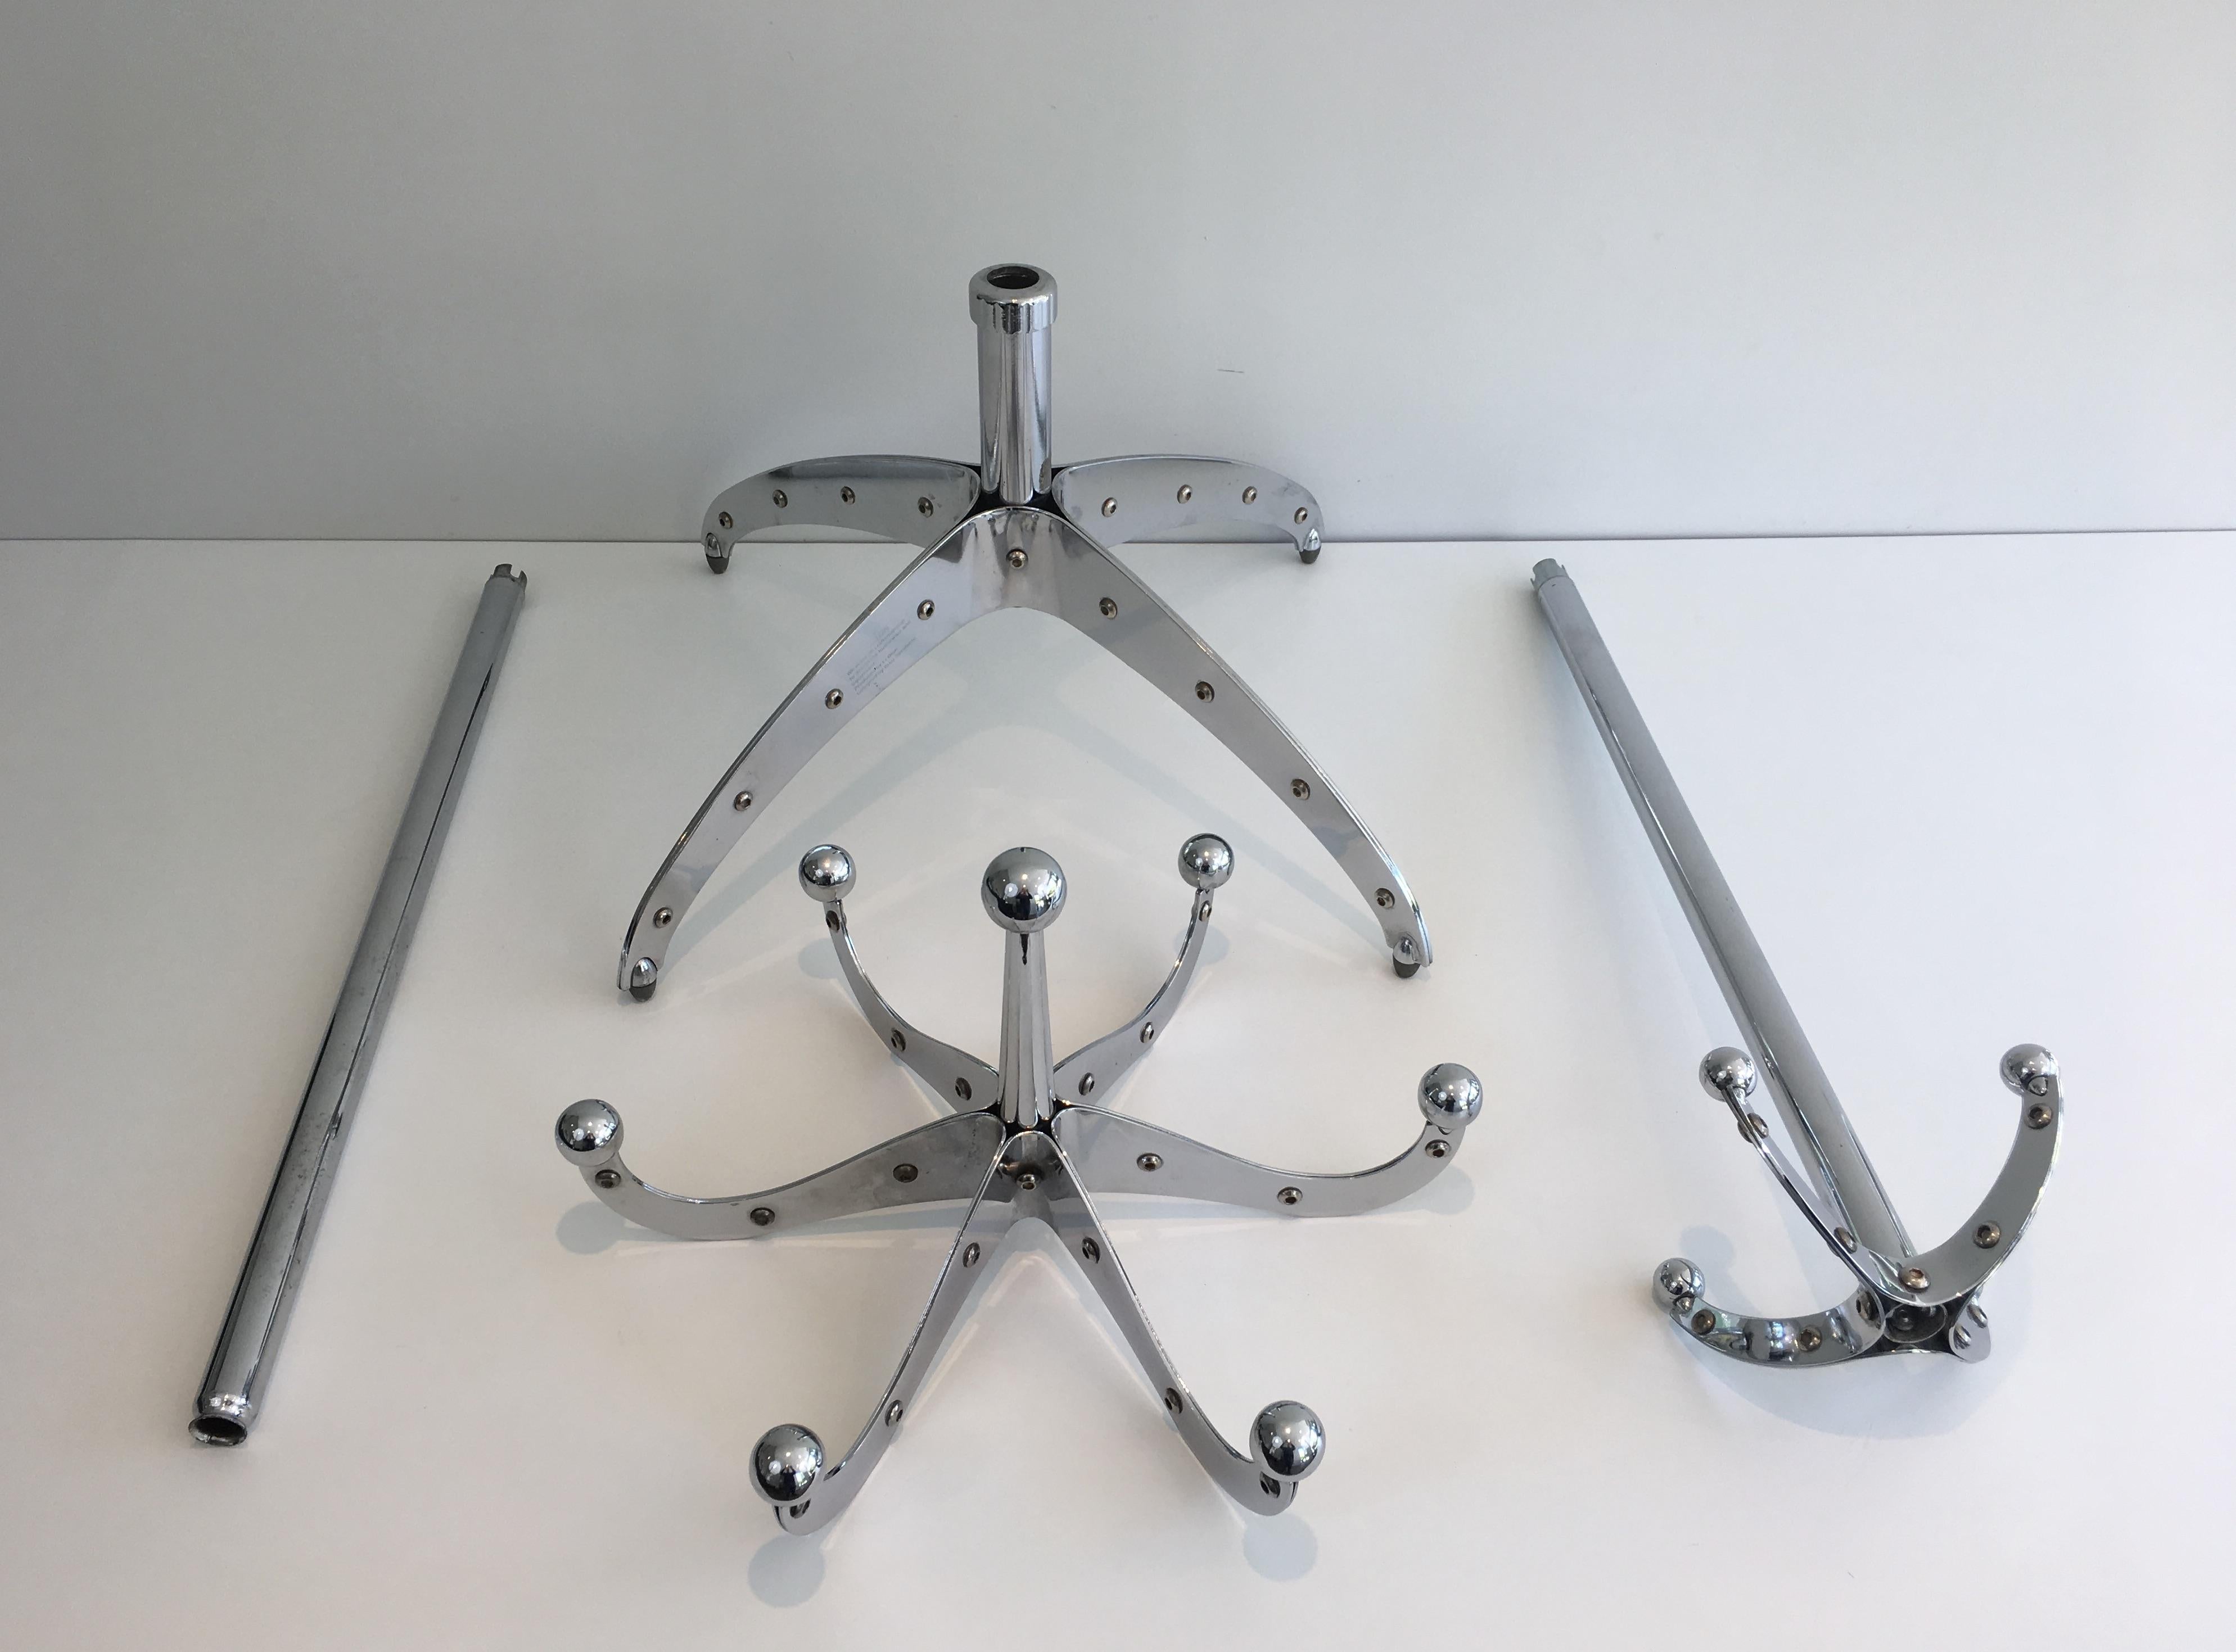 This very nice and unusual coat hanger on stand is made of chromed pieces assembled with rivets. This coat hanger can be unassembled in 4 parts. This is a work by designer Yasuaki Sasamoto. The name of the model is 